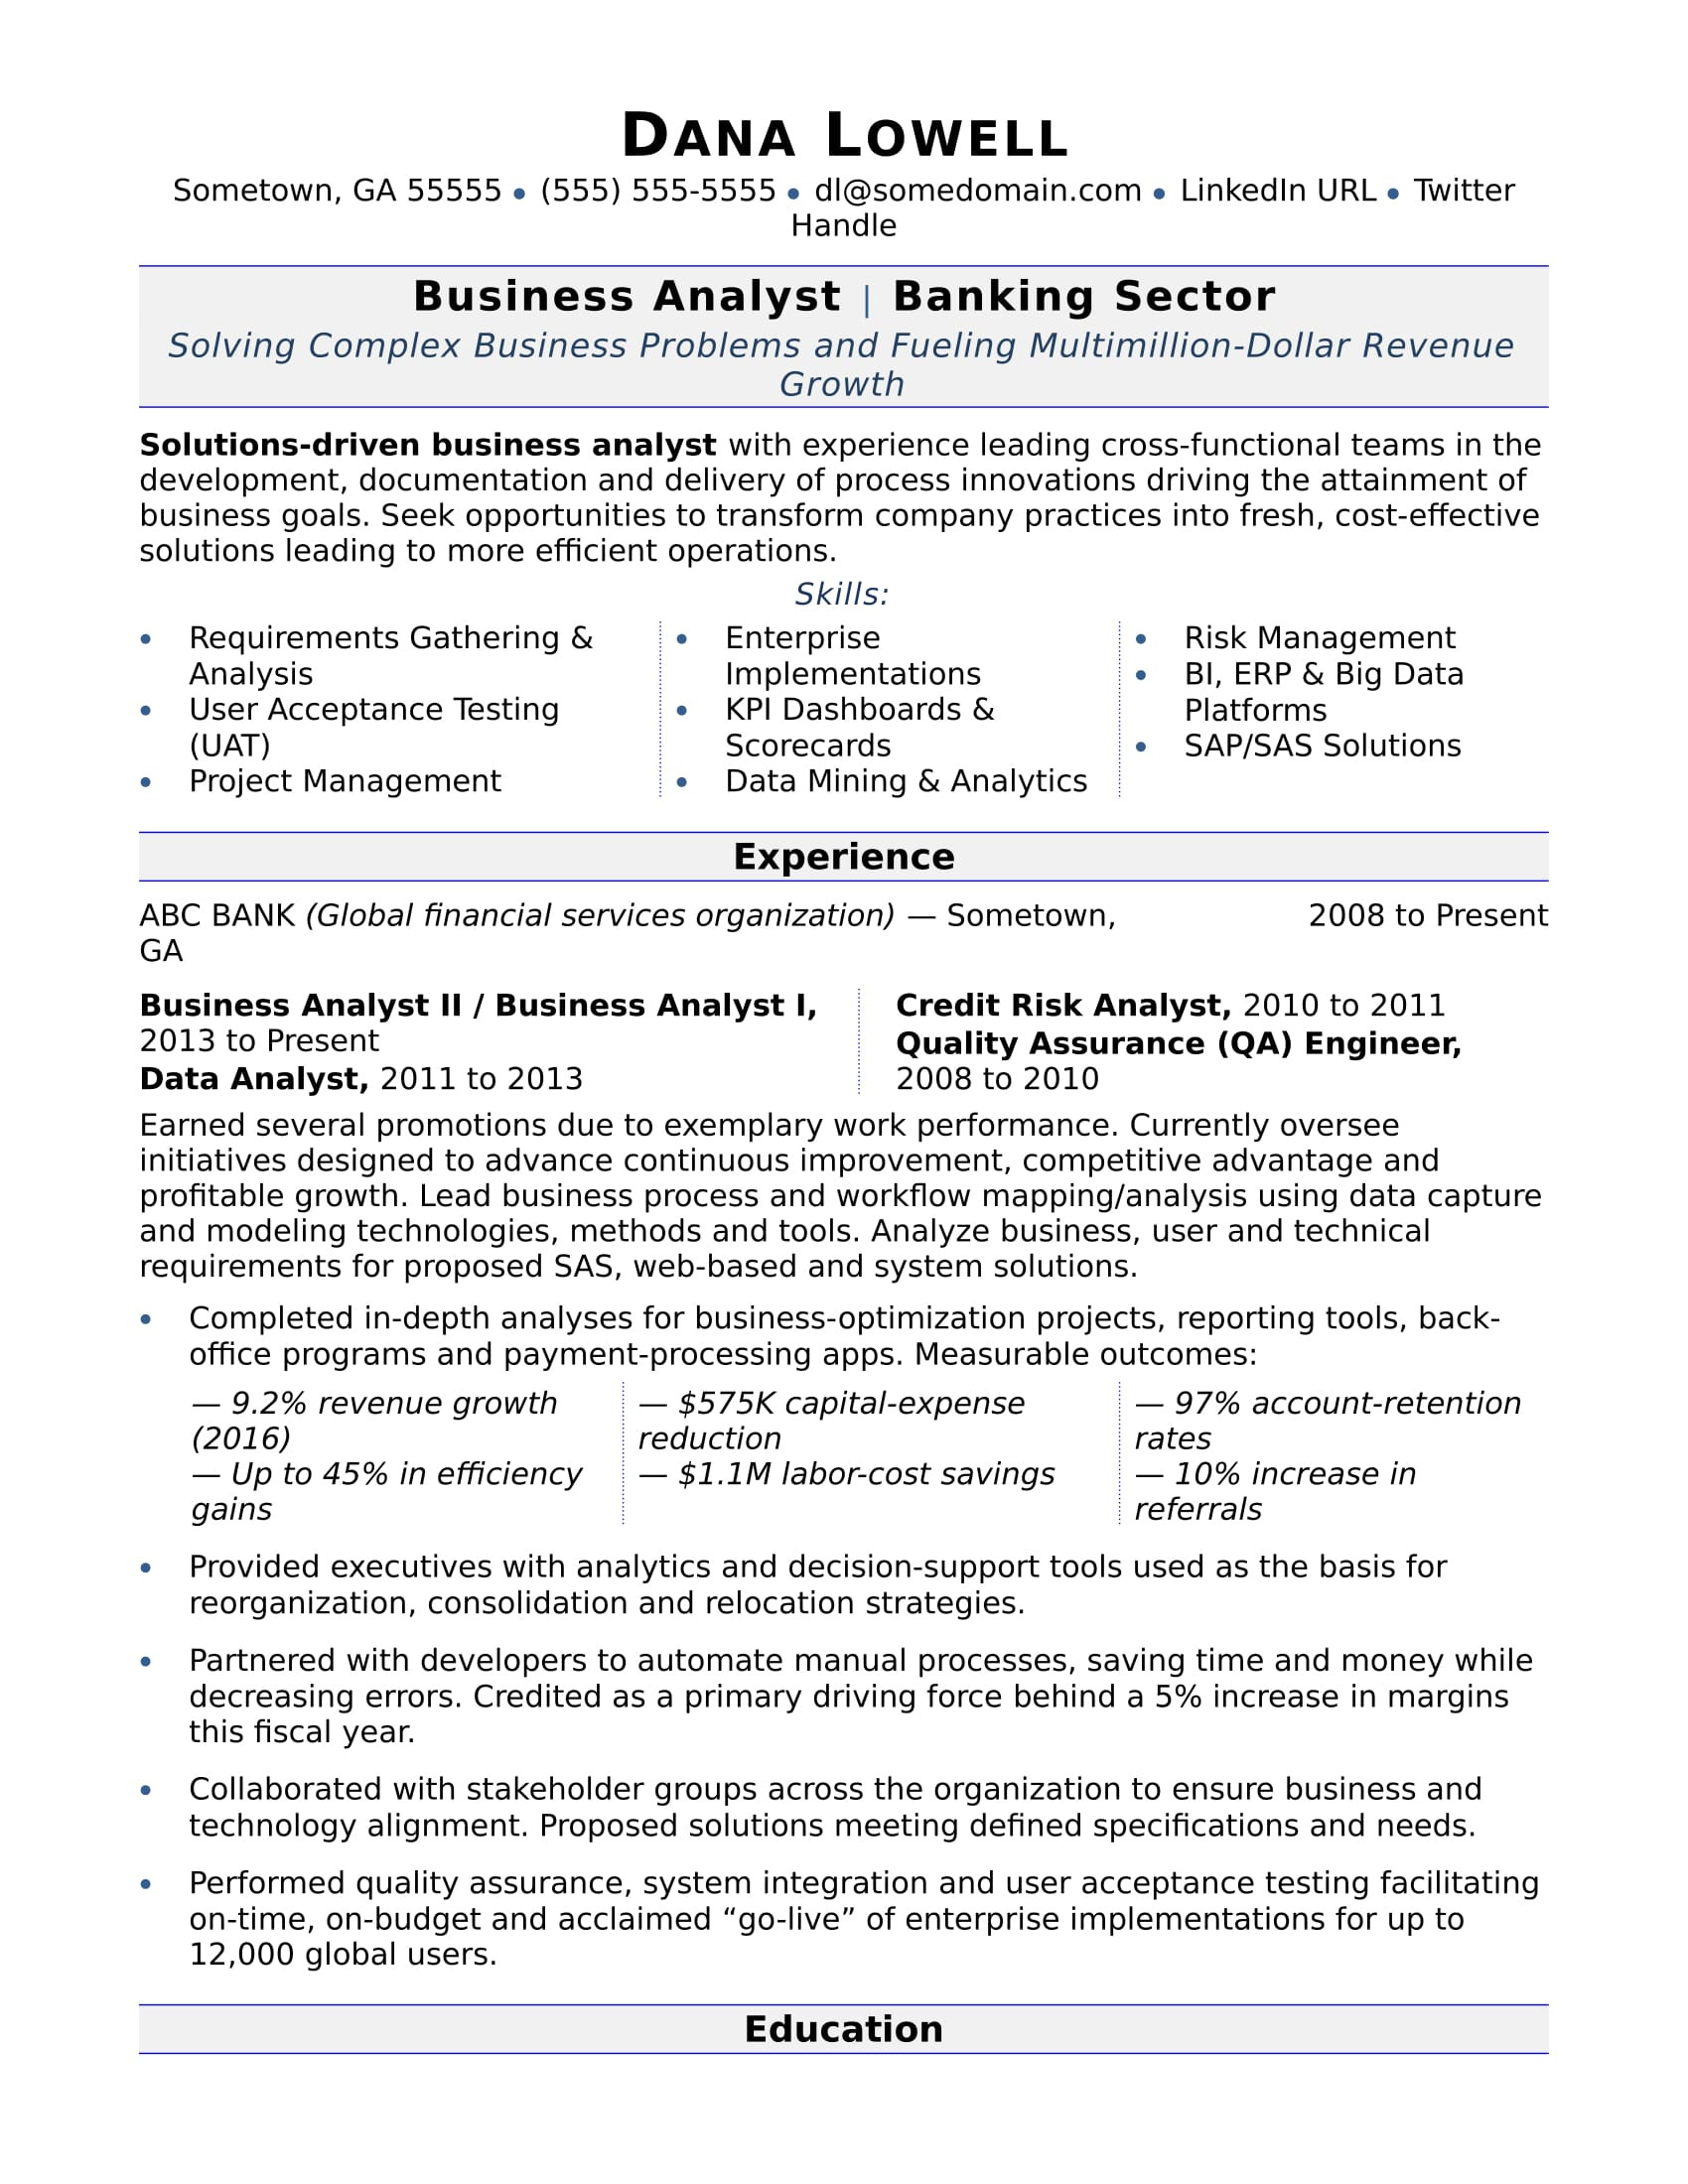 Business Analyst Resume Samples for One Year Experience Business Analyst Resume Monster.com